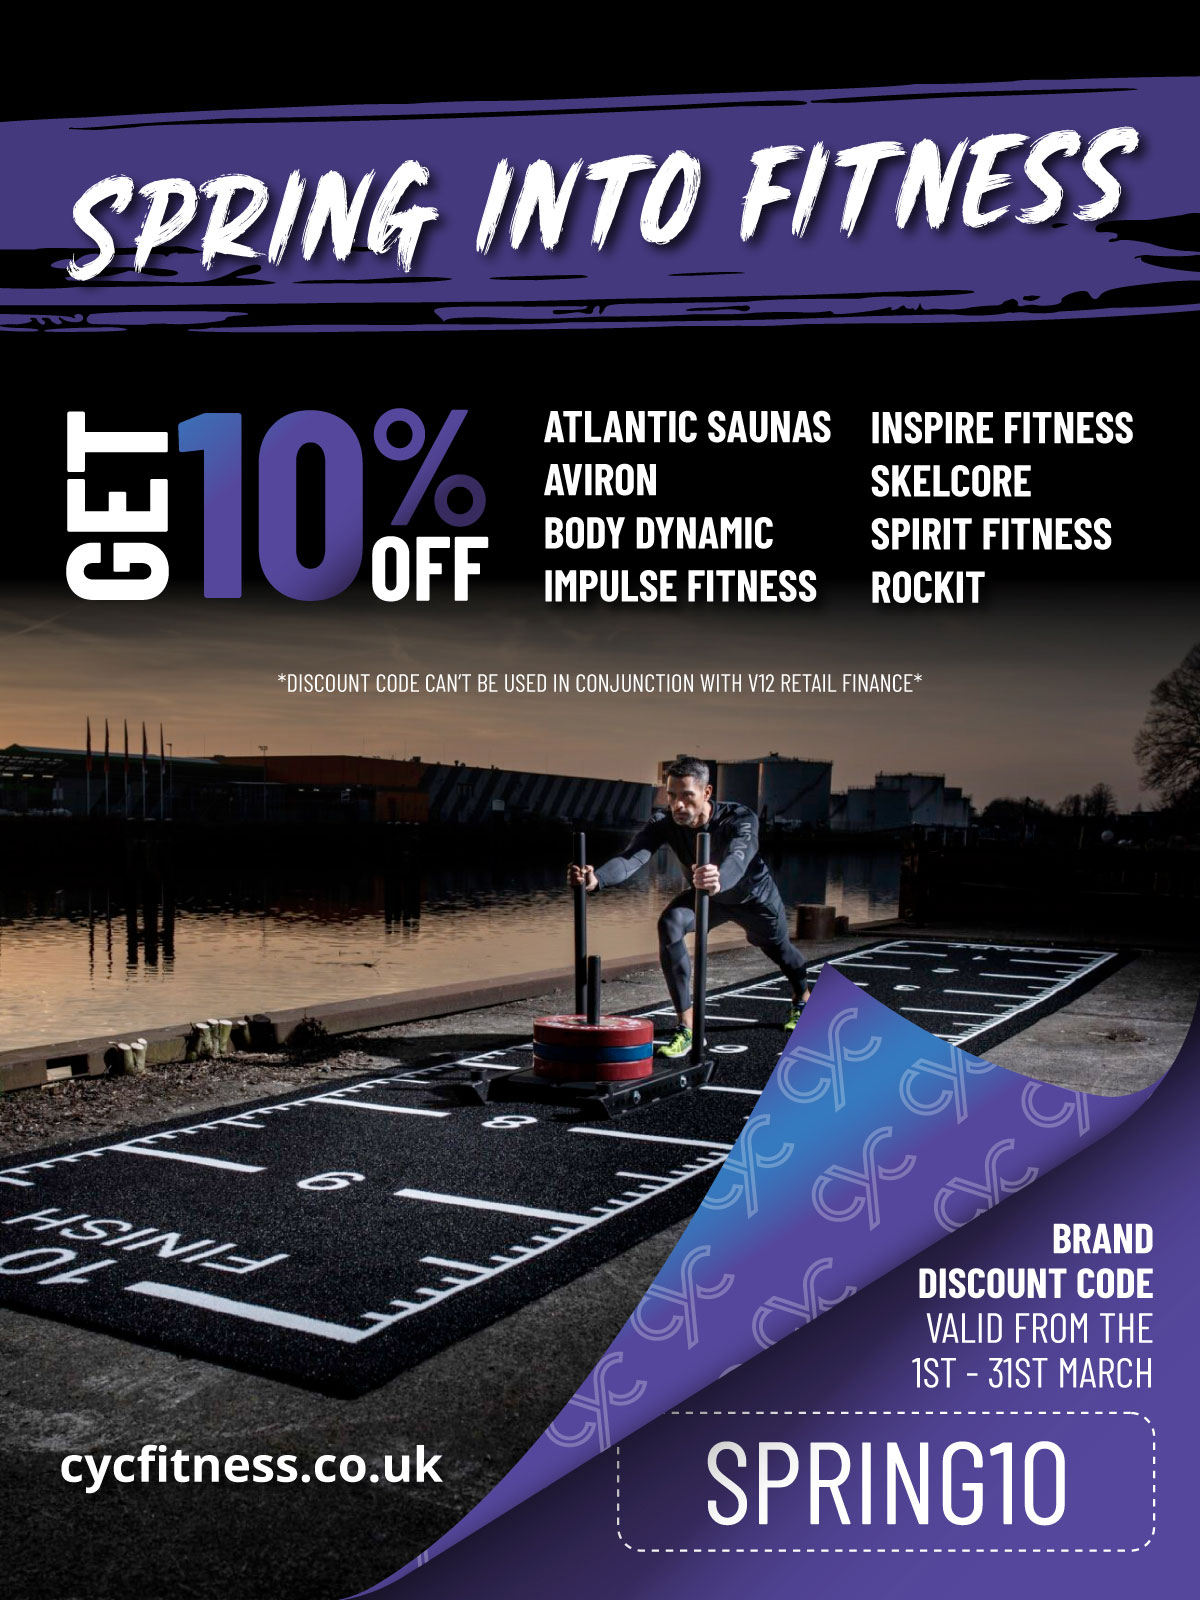 Spring into Fitness - Get 10% off valid from 1st - 31st March - SPRING10